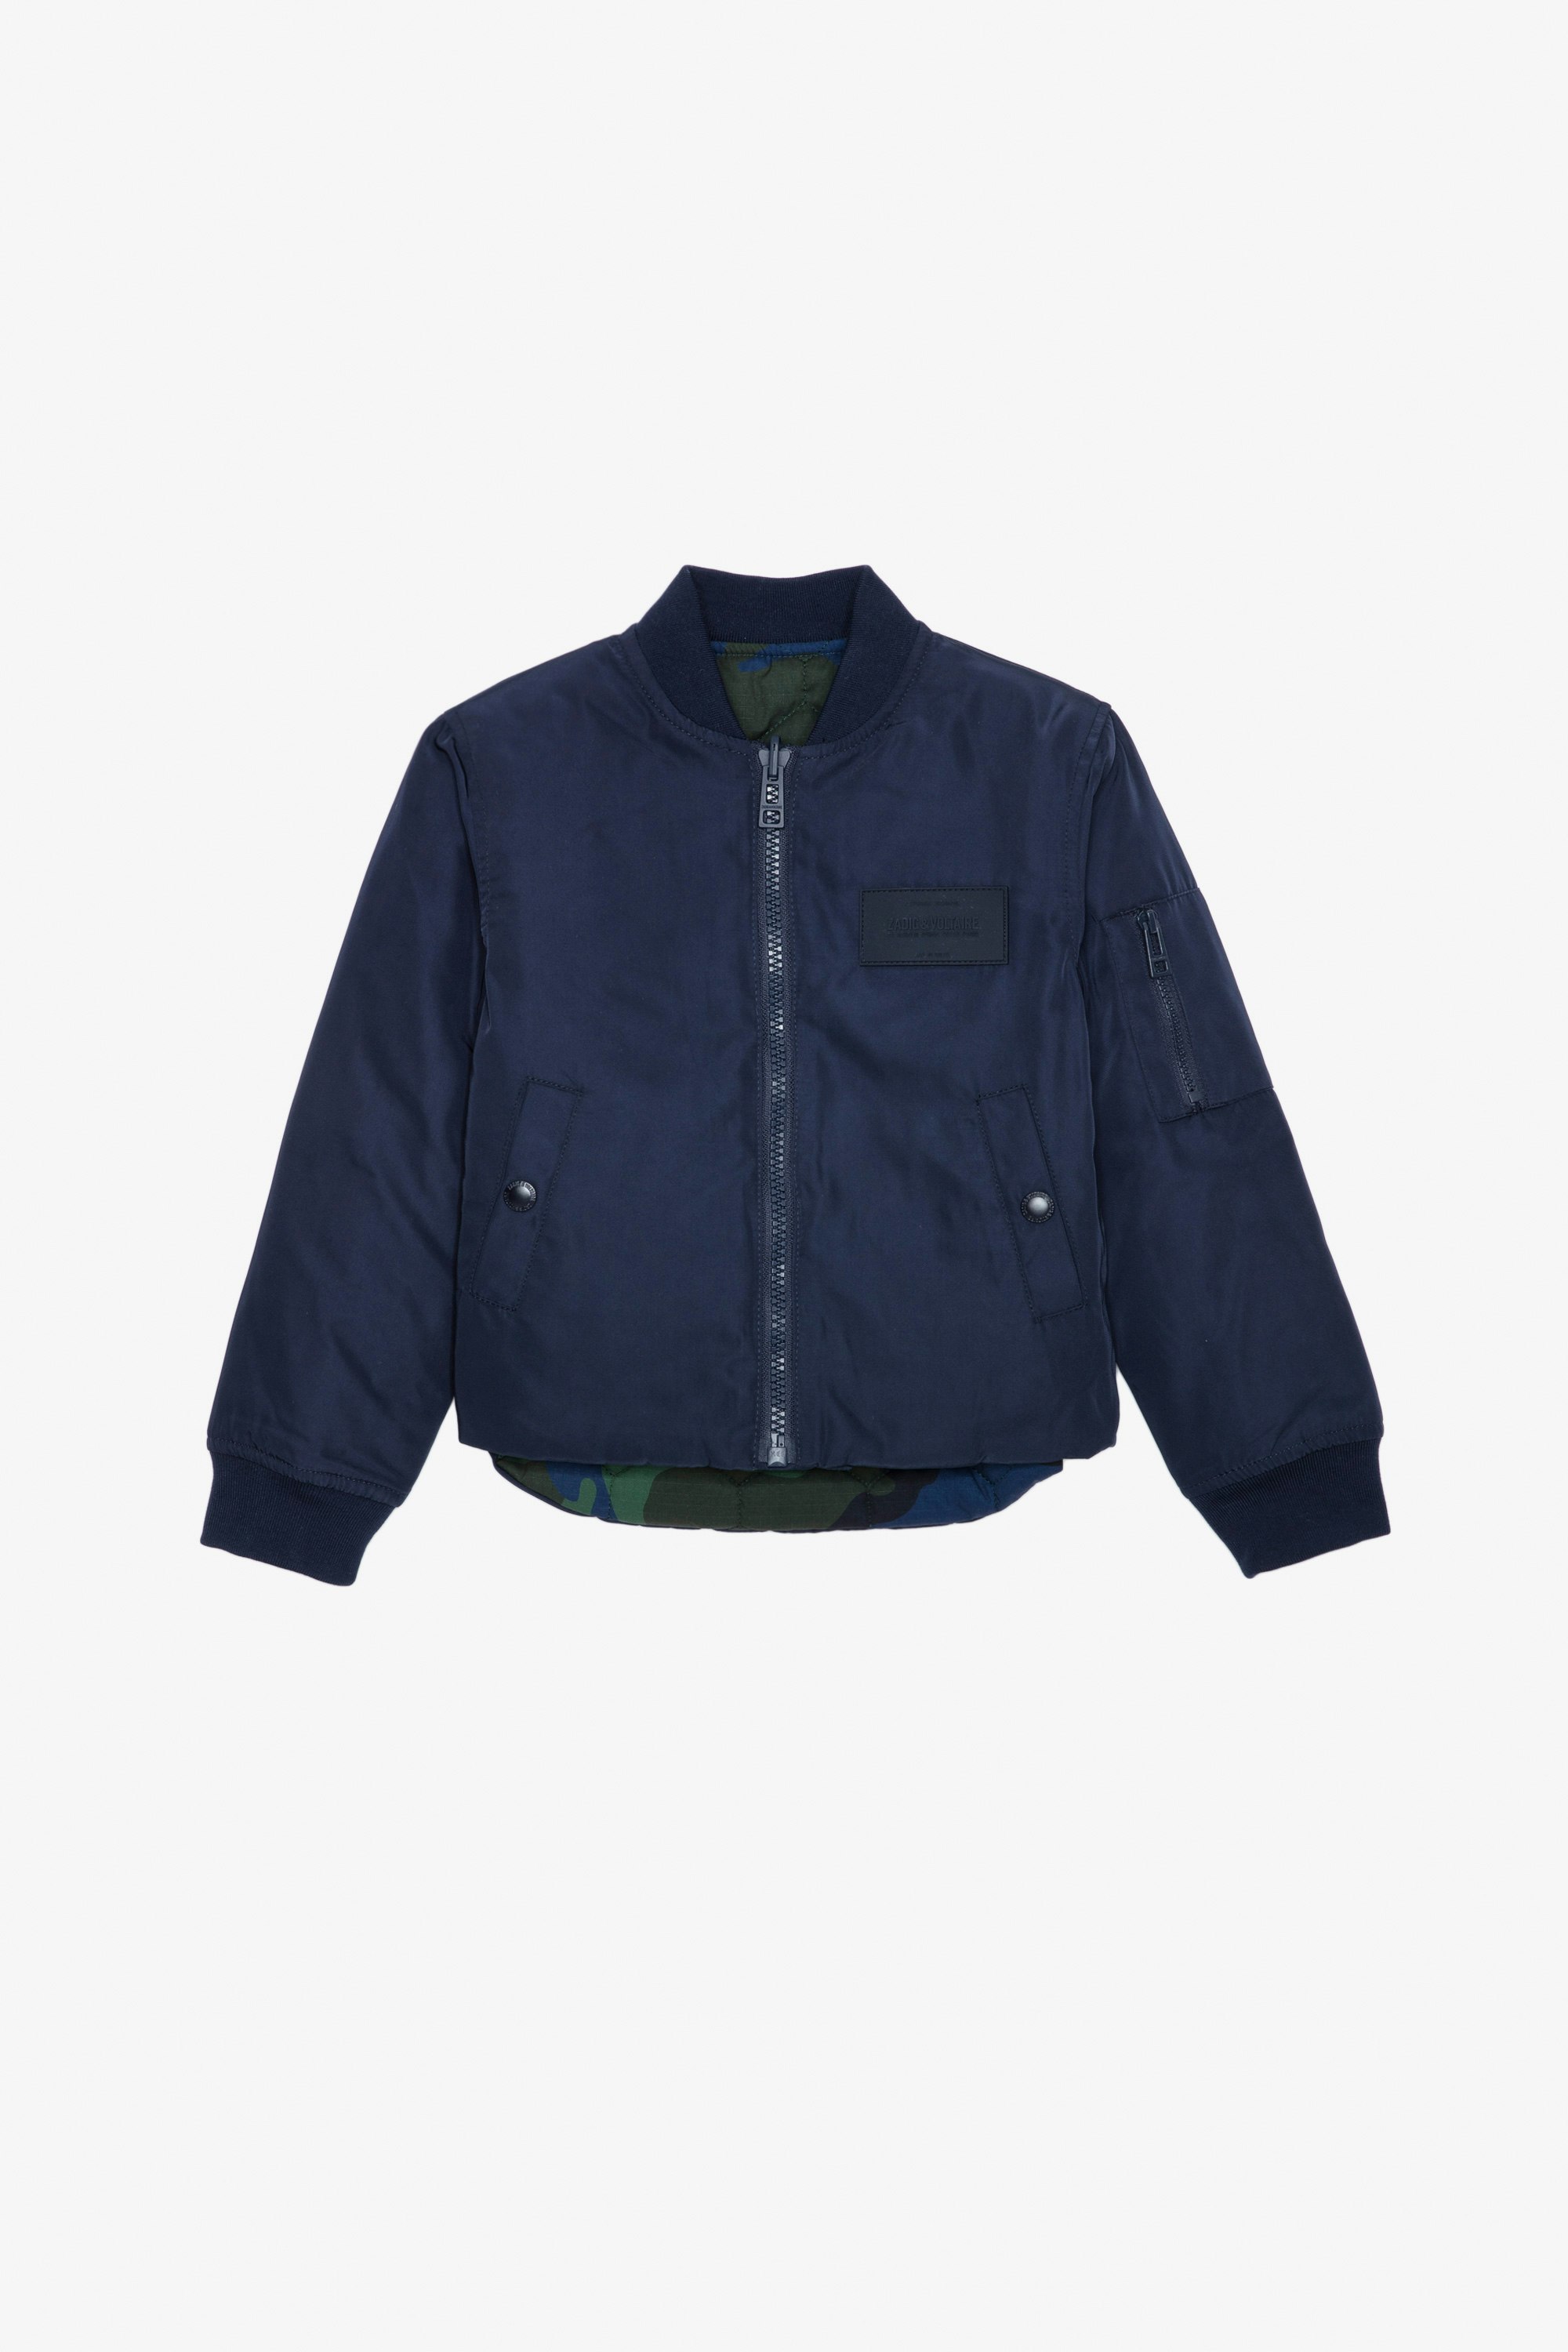 Charlie Boys’ Jacket Boys’ plain navy blue reversible jacket with camouflage print and ZV embroidery.